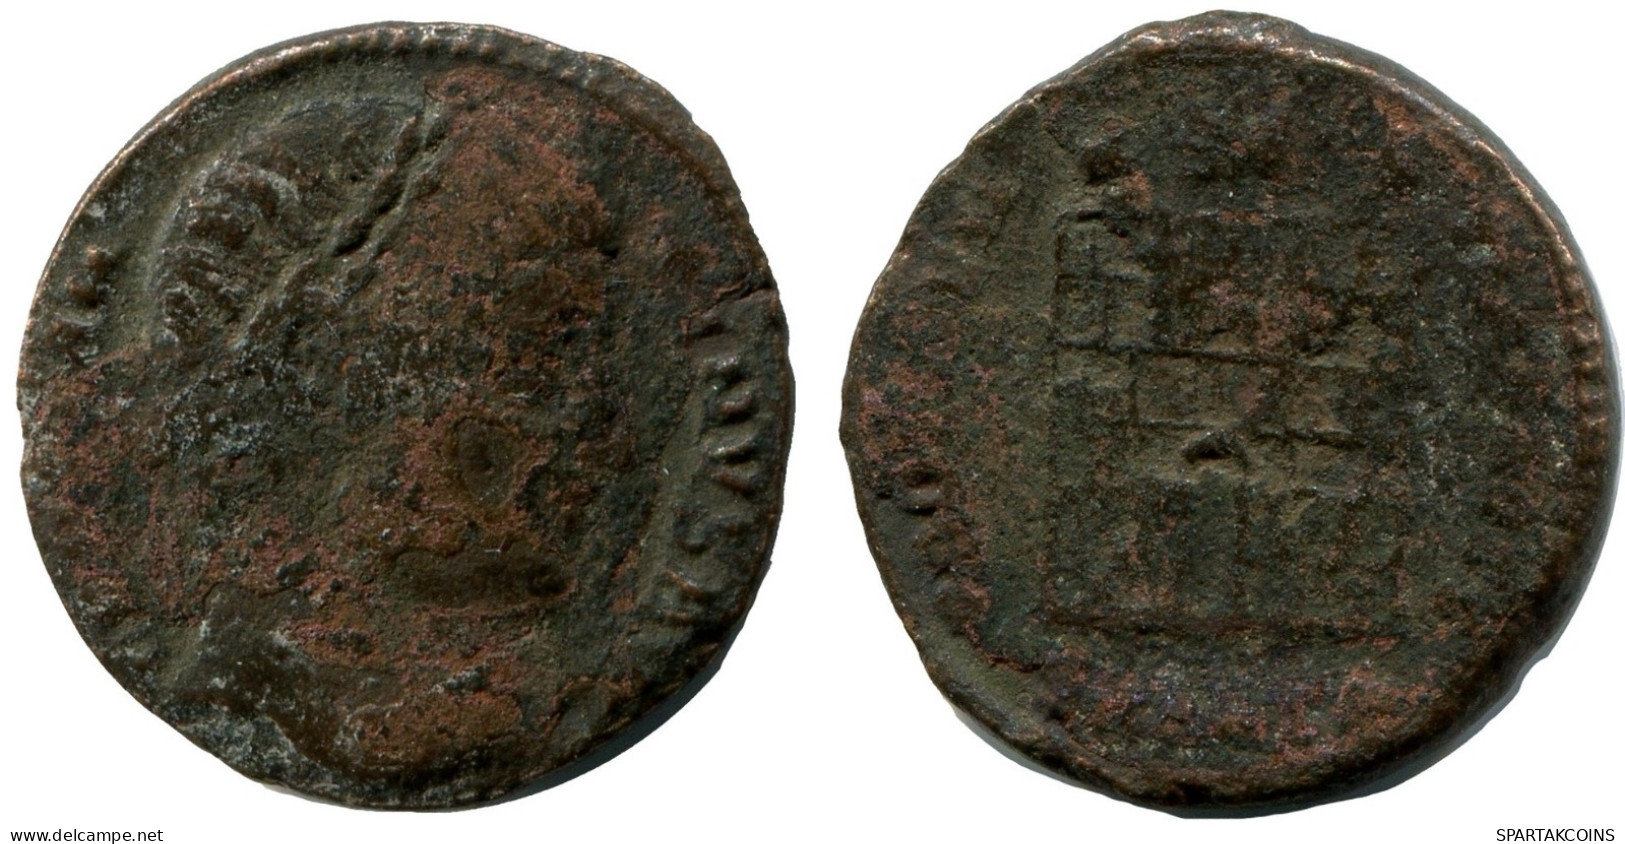 CONSTANTINE I MINTED IN ANTIOCH FROM THE ROYAL ONTARIO MUSEUM #ANC10567.14.D.A - The Christian Empire (307 AD To 363 AD)